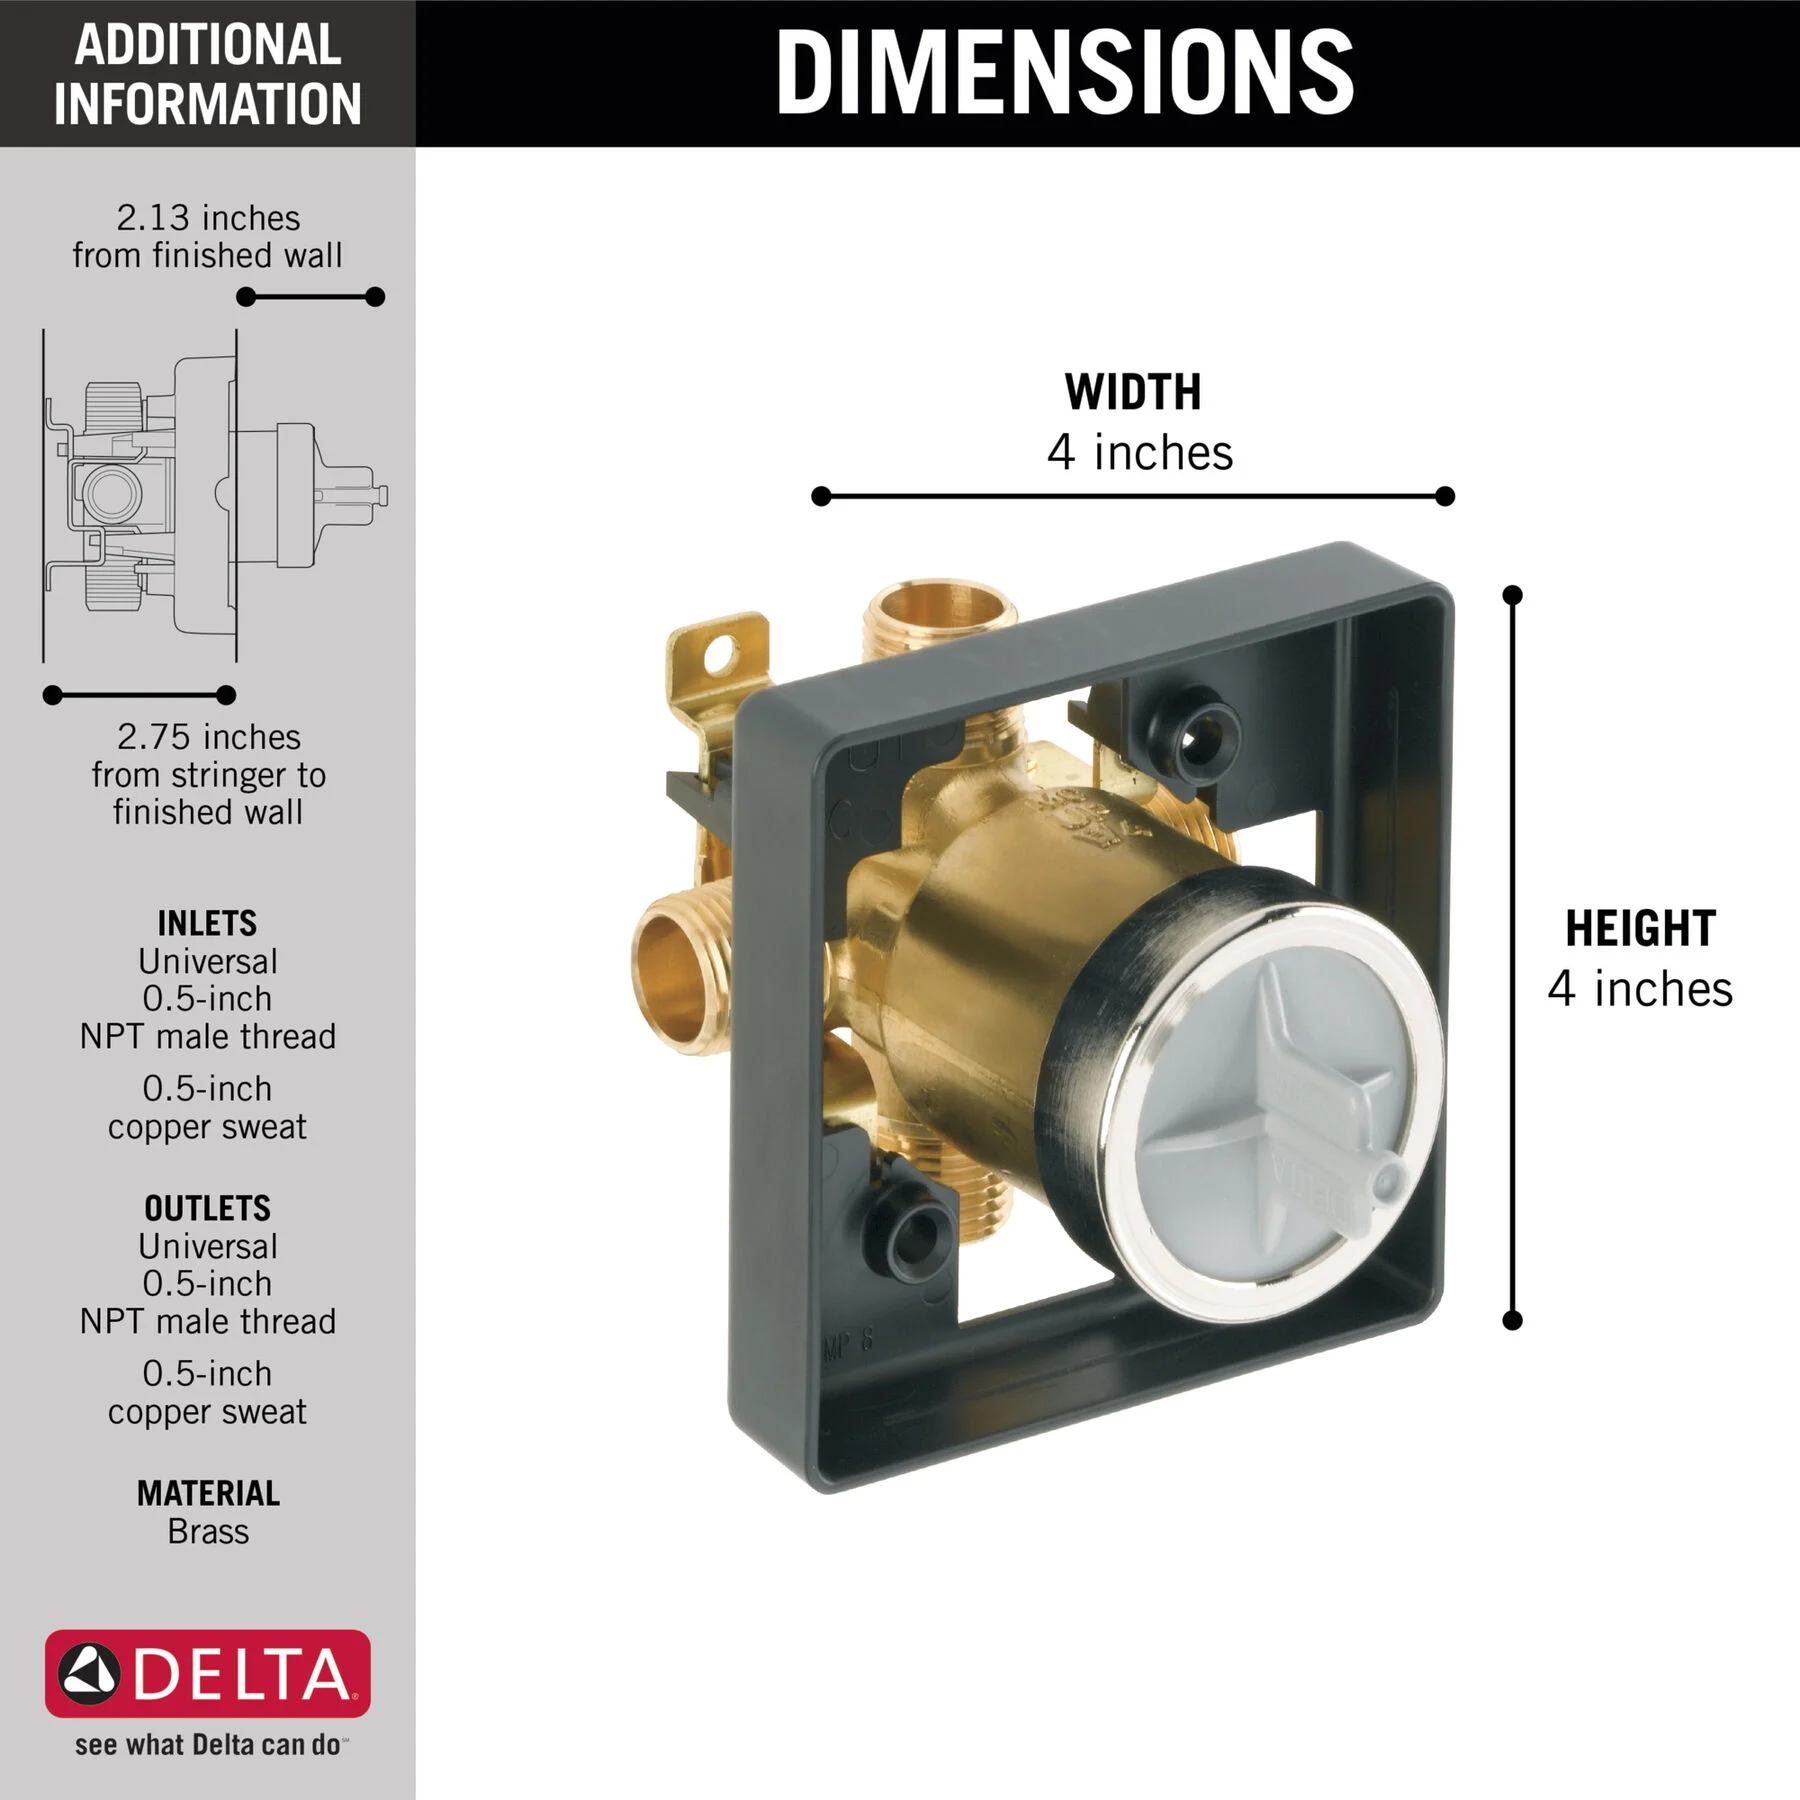 How to Install Delta Shower Valve Rough-In: Quick Guide